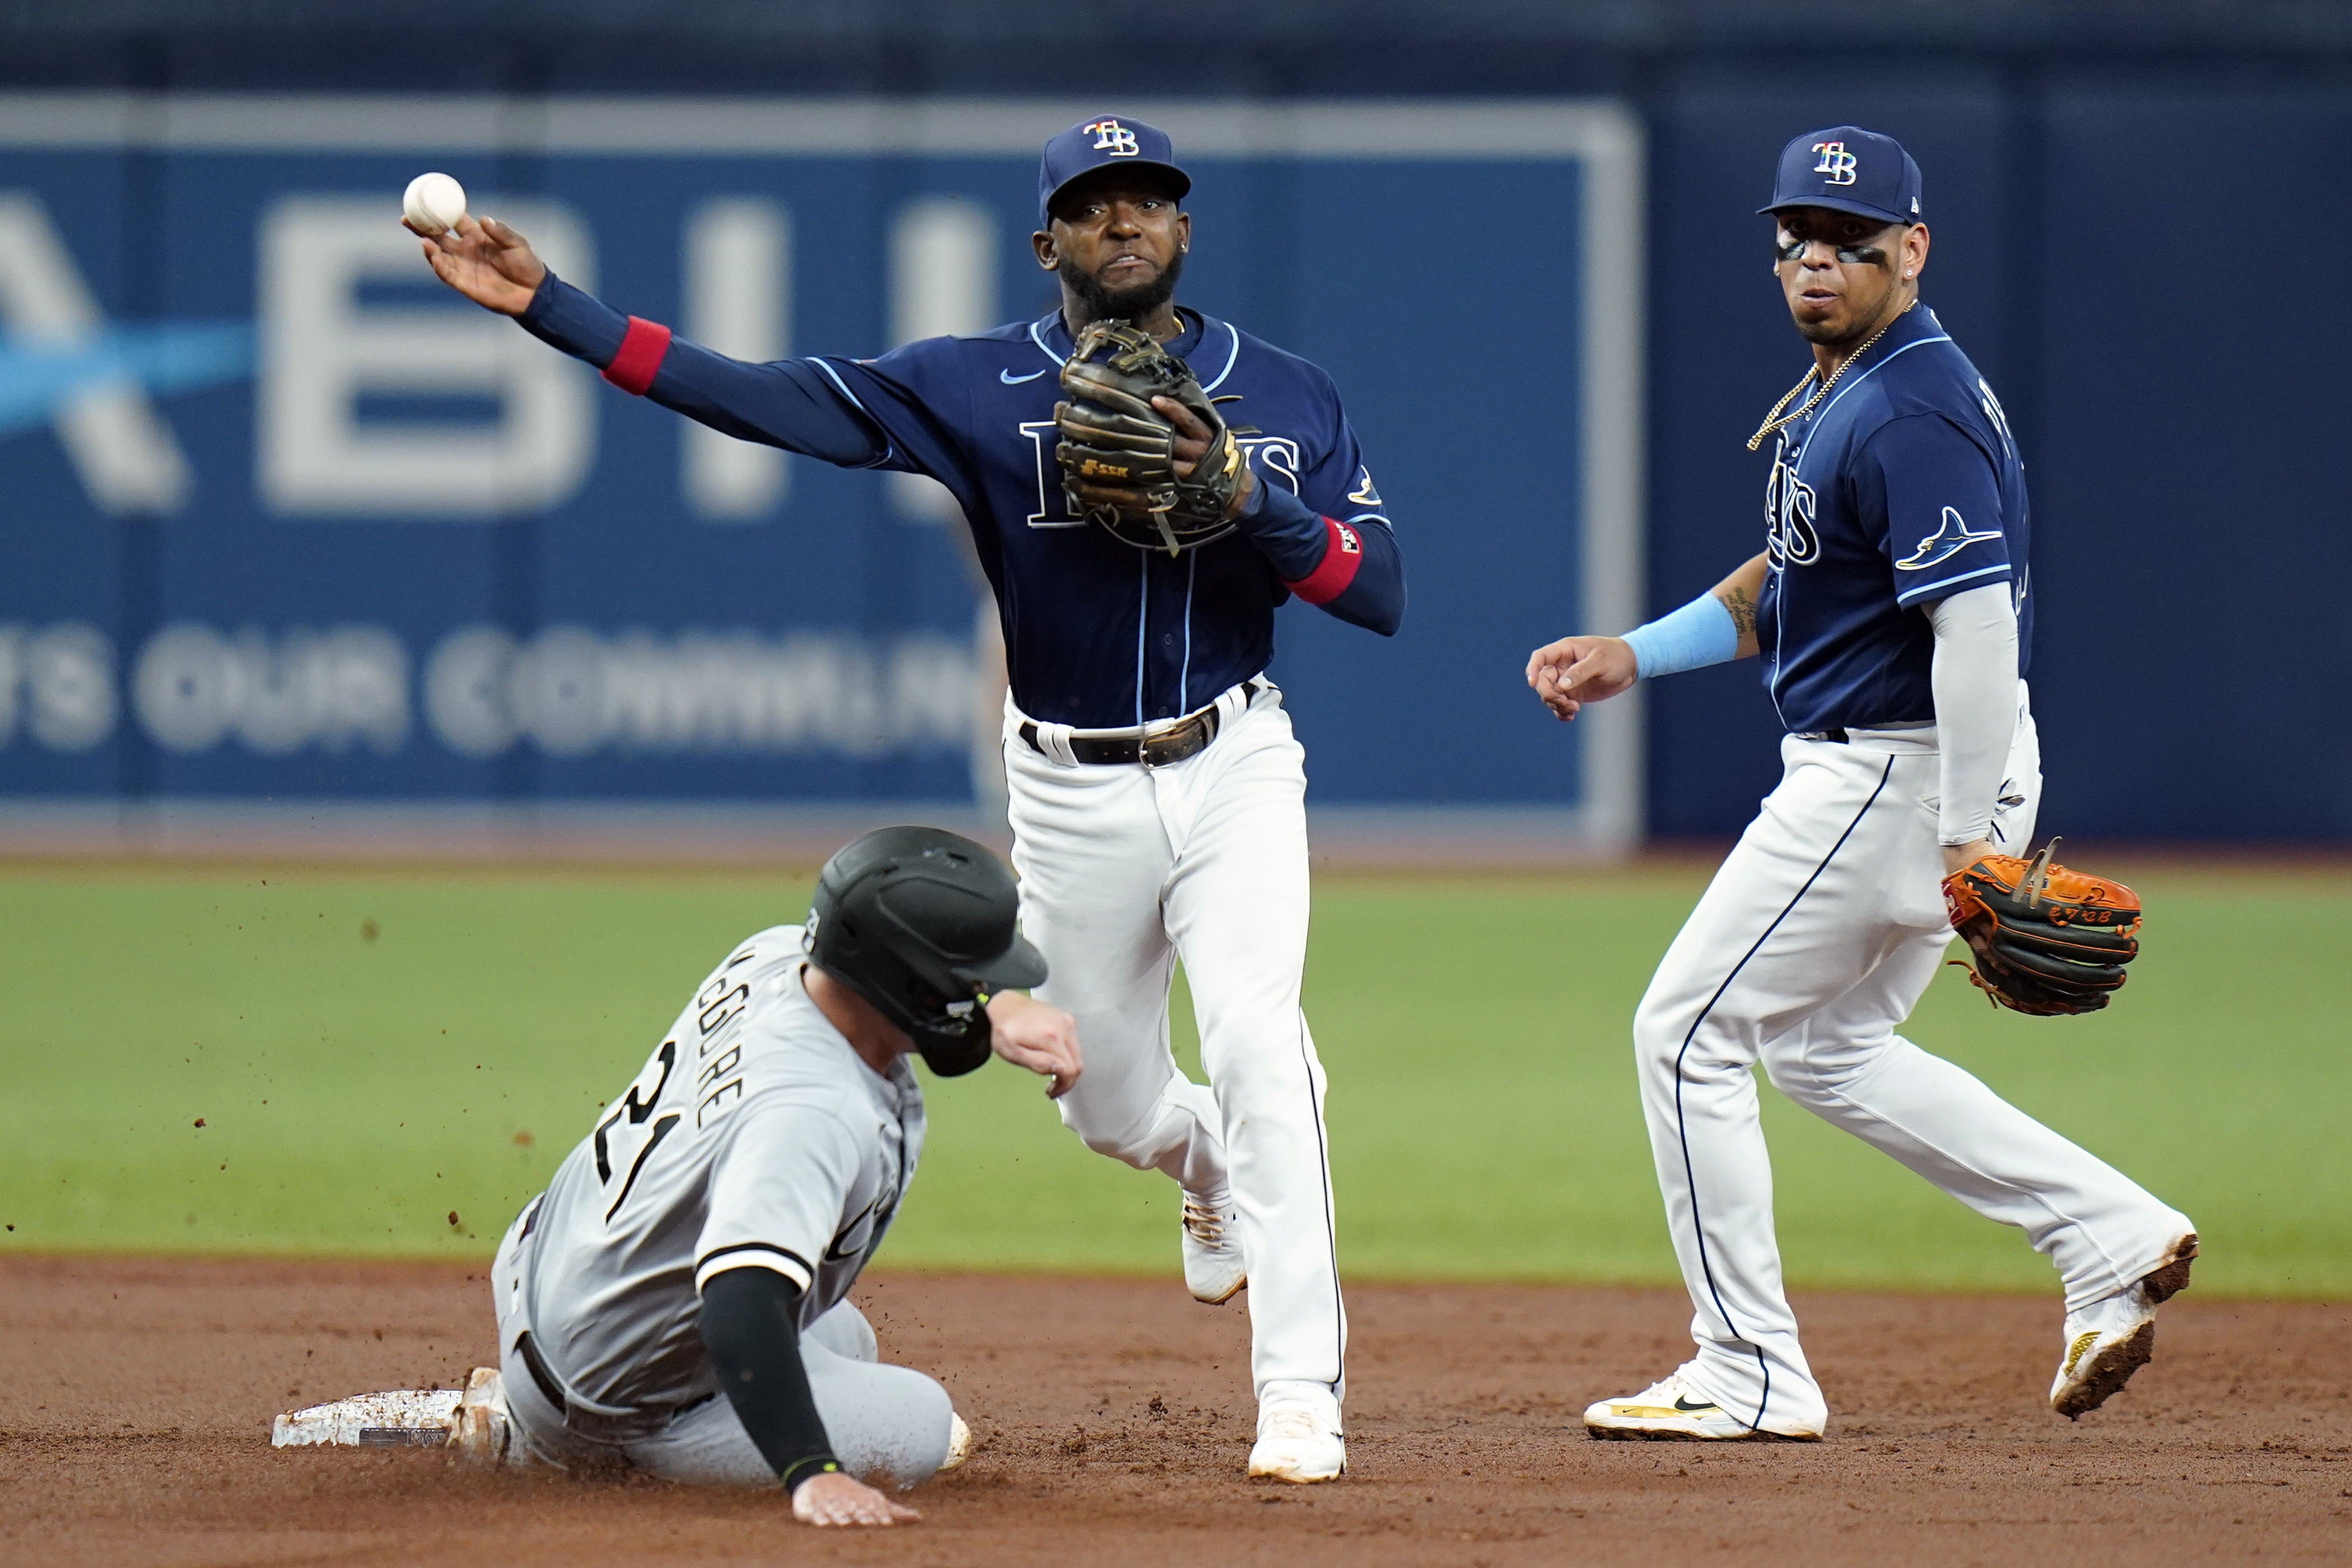 Tampa Bay Rays players not wearing LGBTQ logos won't divide team, manager  says